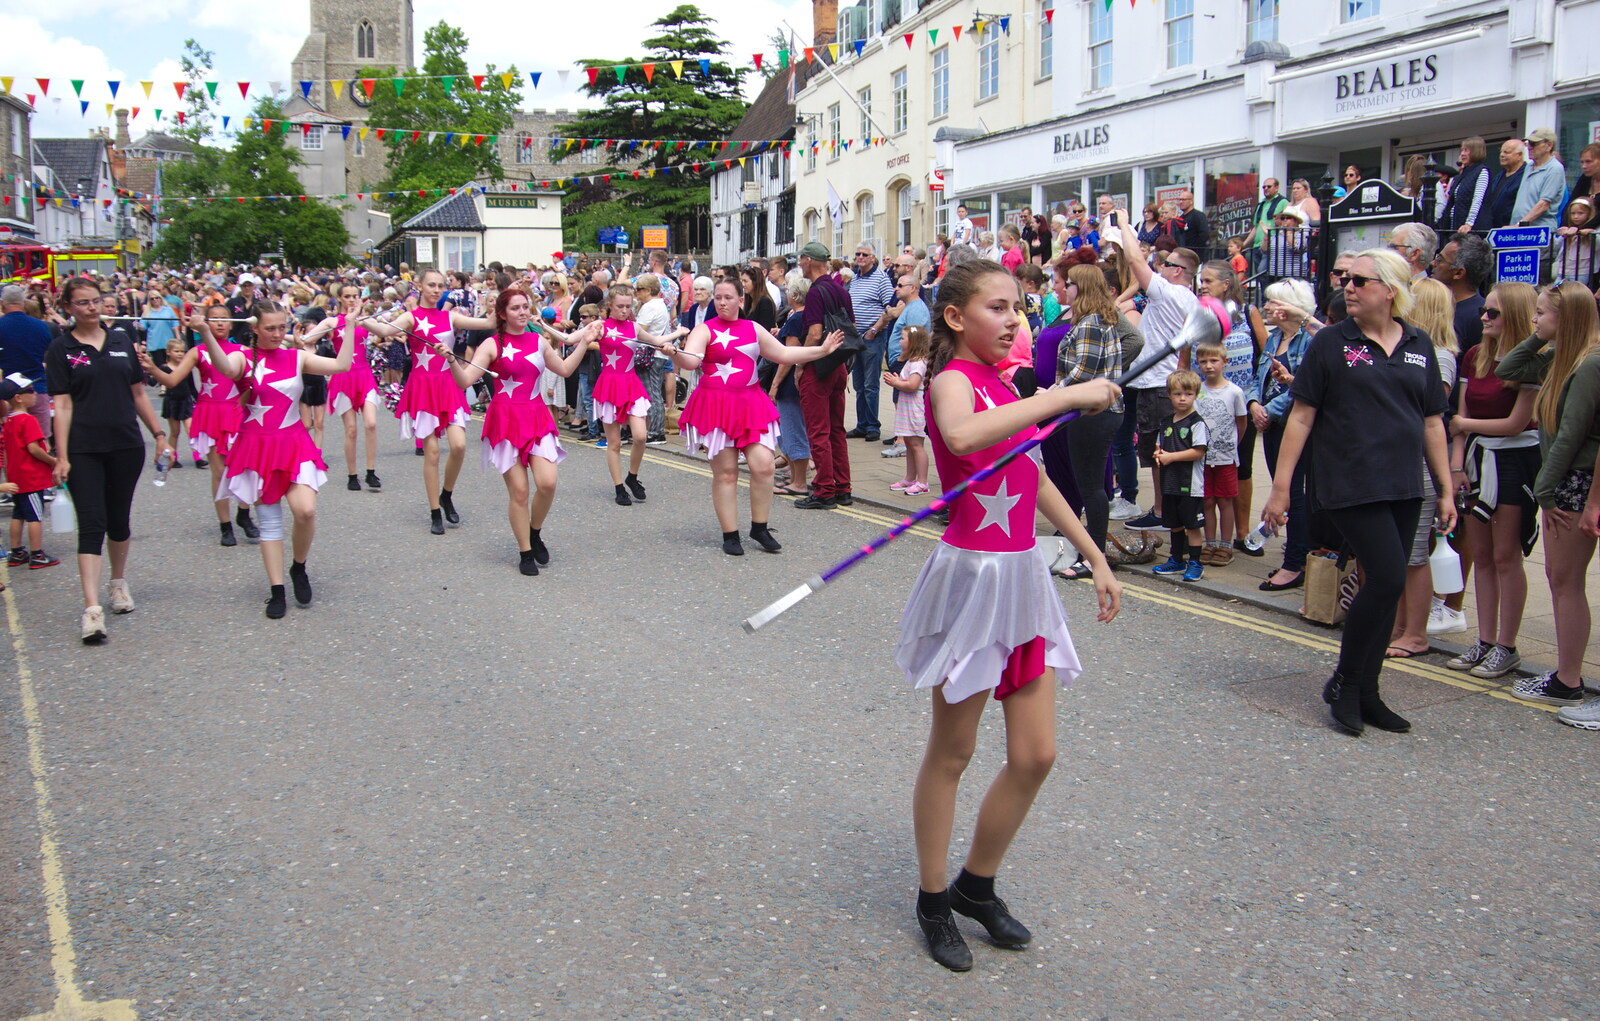 Some majorettes do their thing from The Diss Carnival 2019, Diss, Norfolk - 9th June 2019